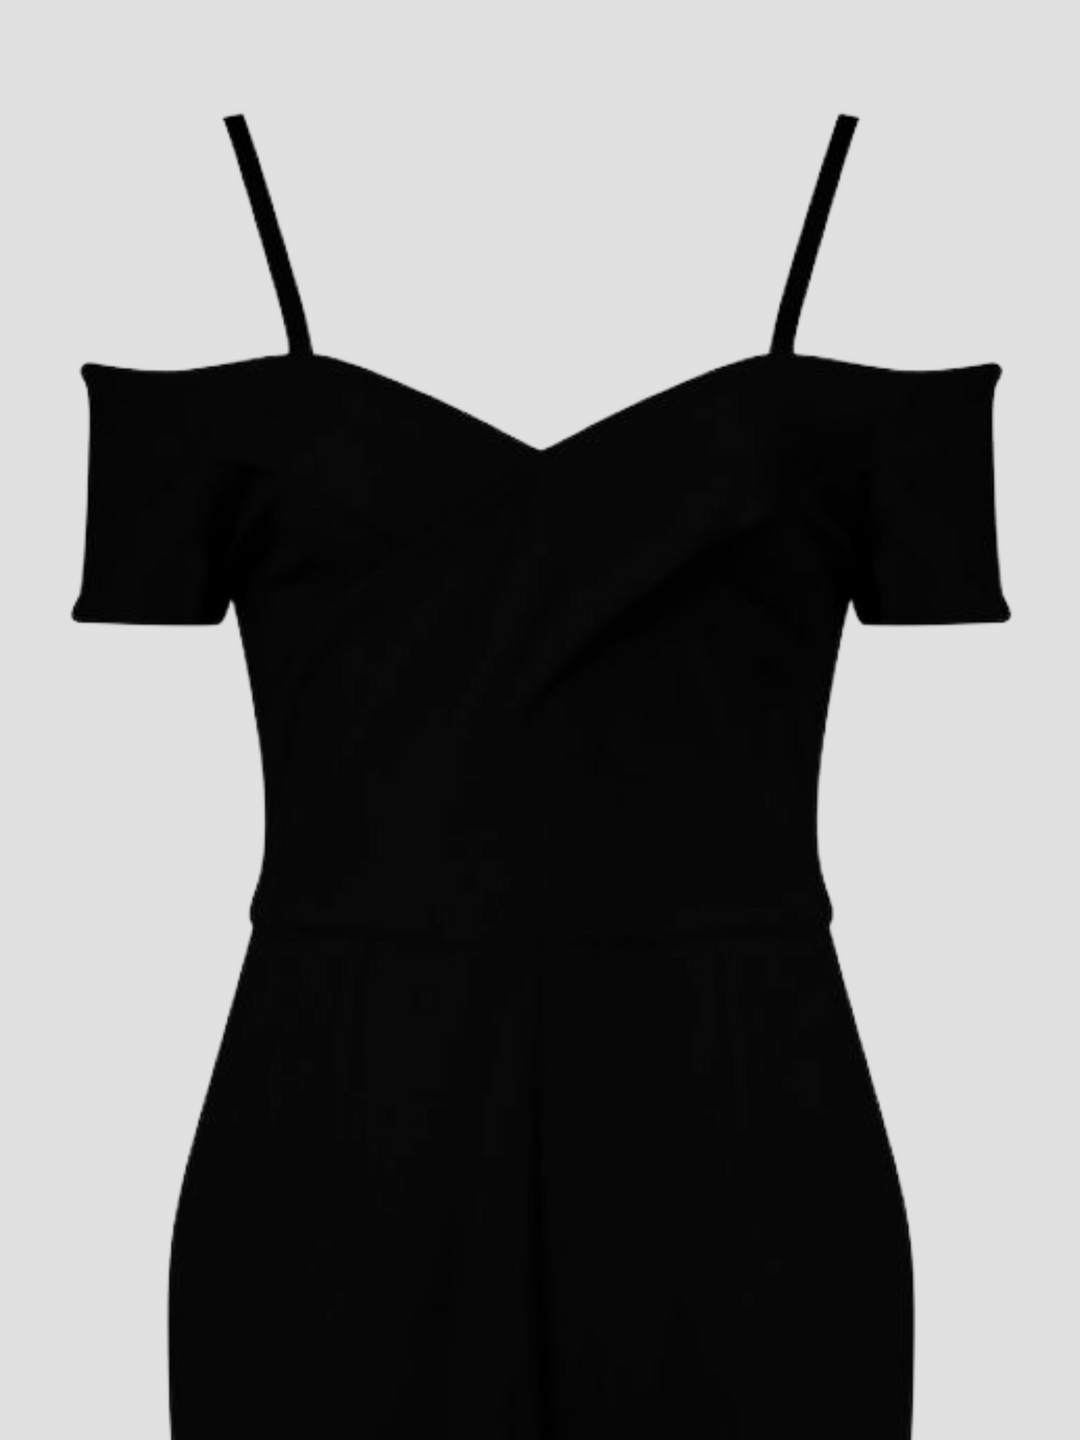 A closeup of a ghost manequin wearing a bardot style neckline and adjustable straps. The jumpsuit has a tailored fit  with zip back fastening.  The closeup demonstrates the bardot style cut. 